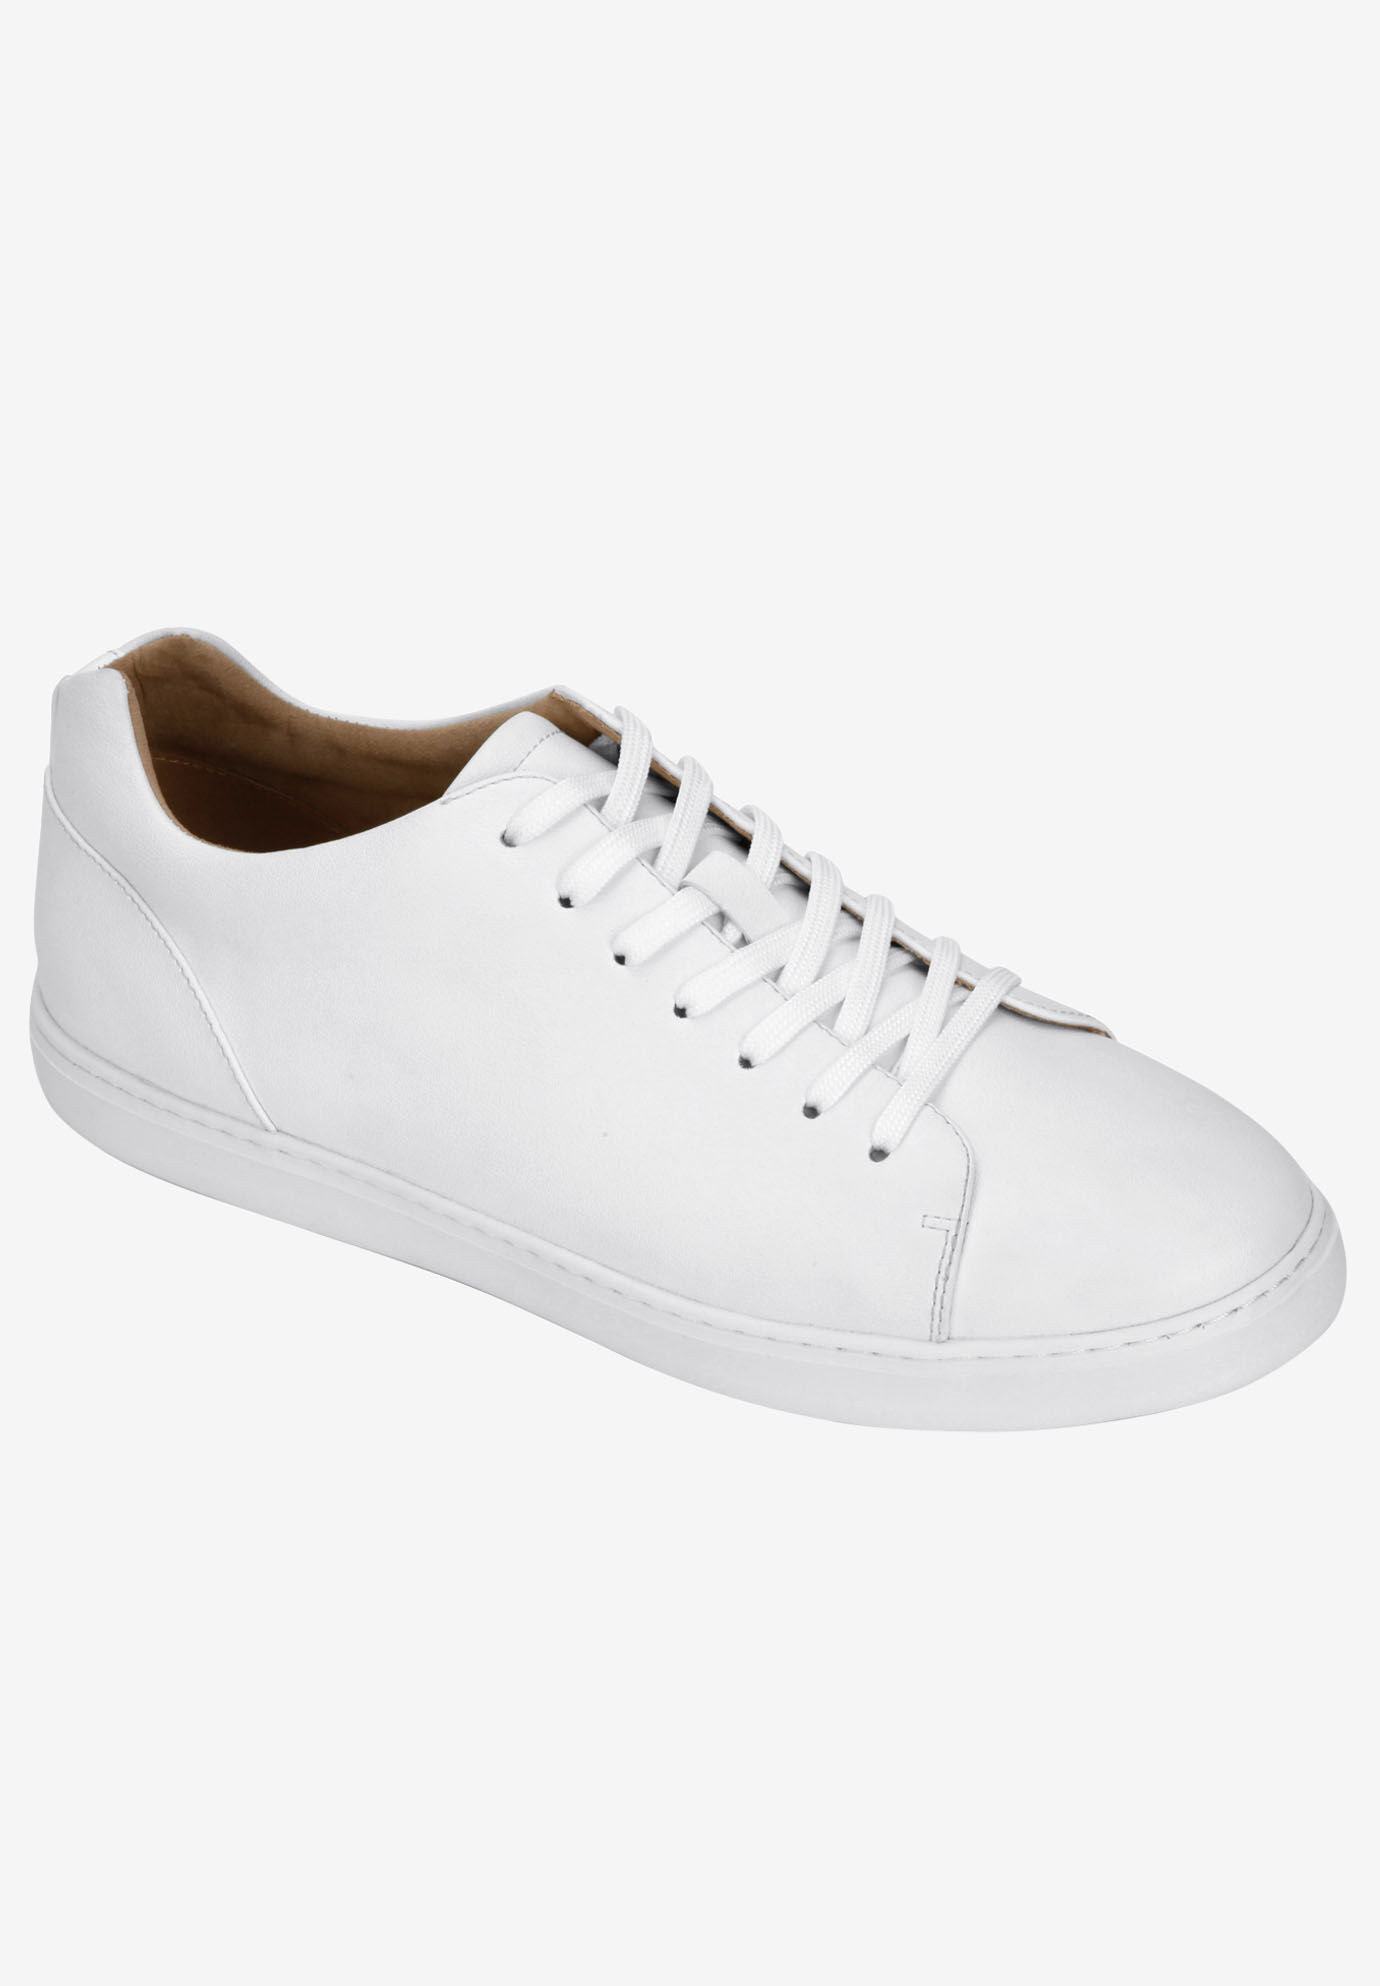 kenneth cole reaction indy sneaker